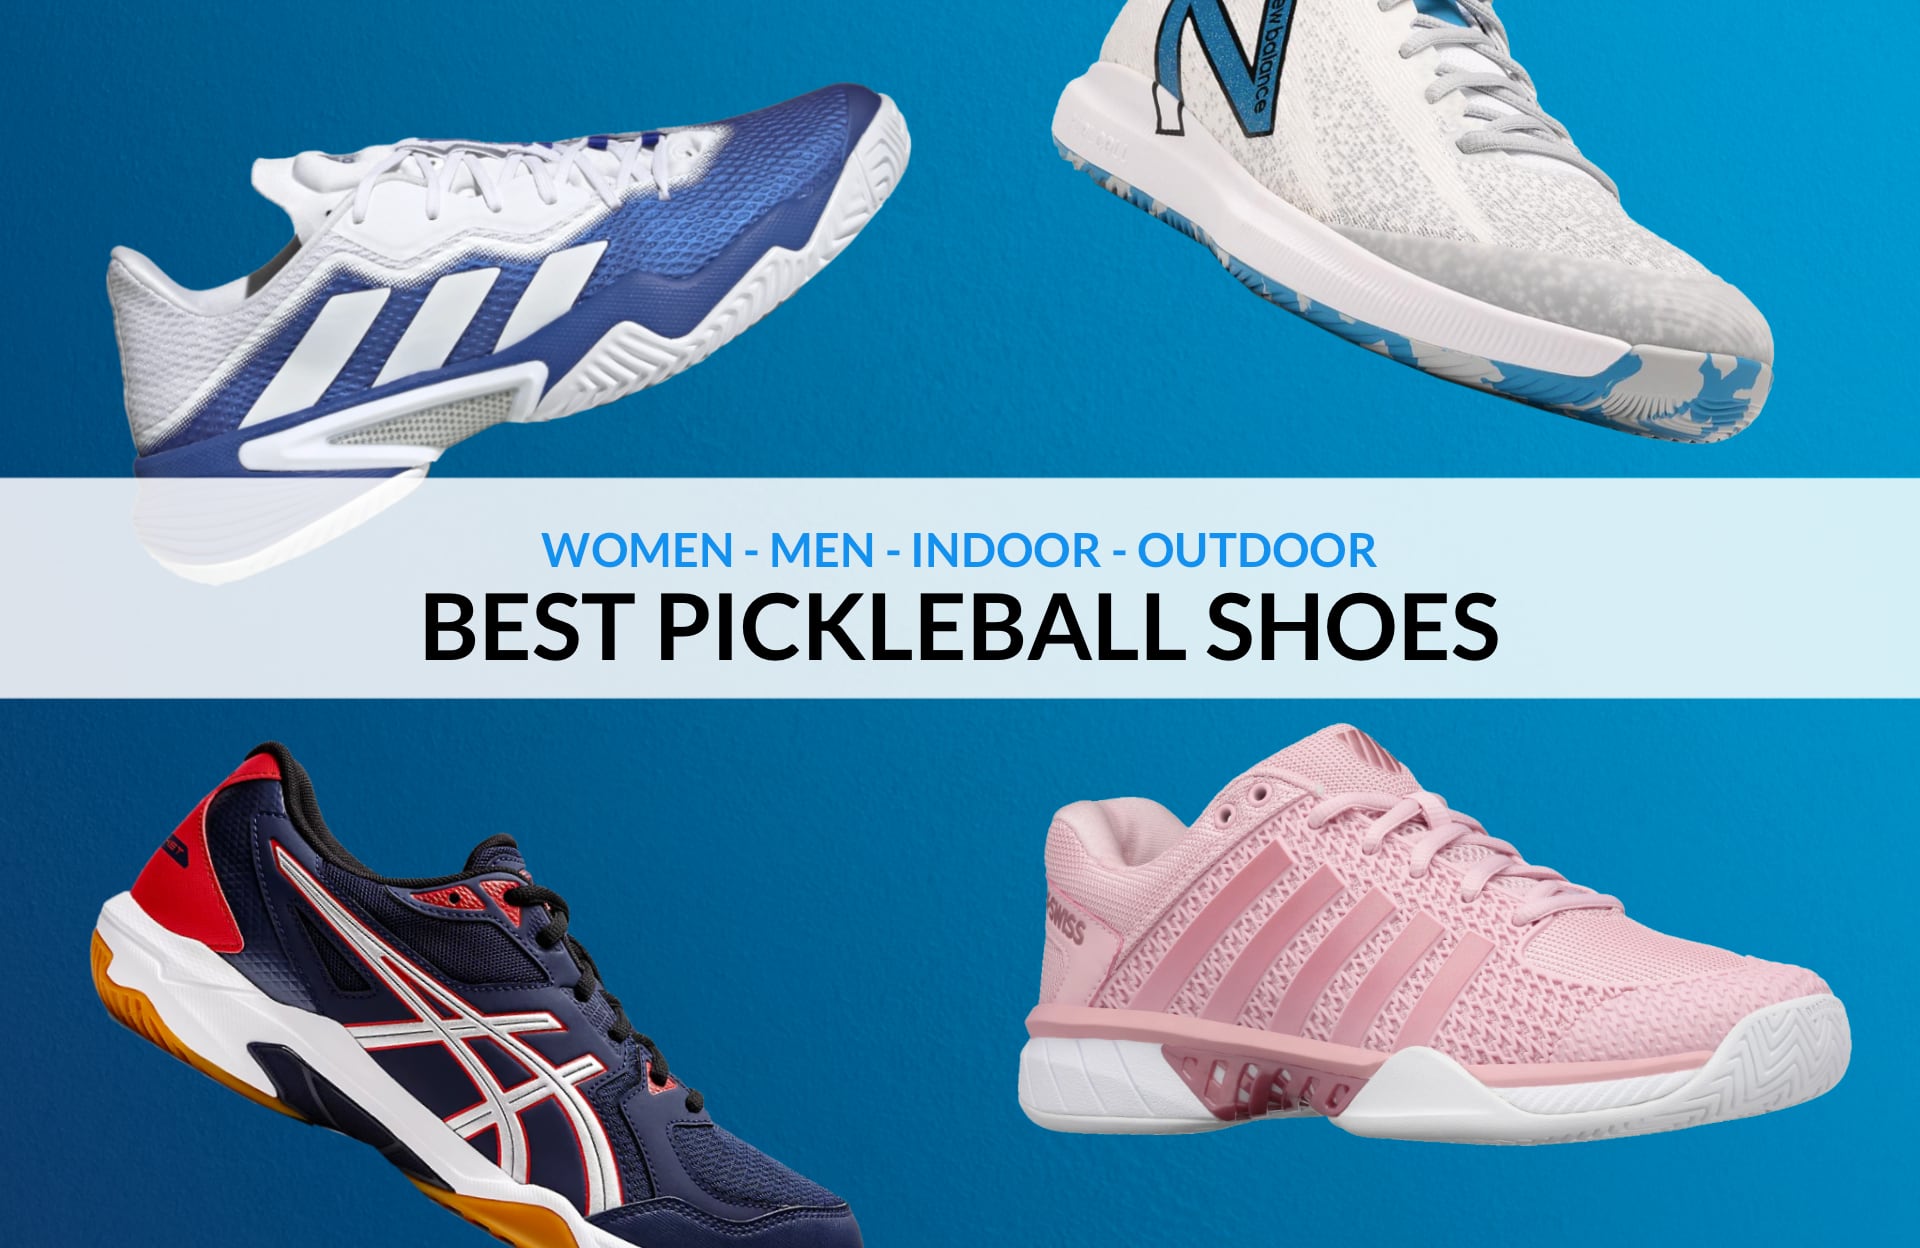 Best Pickleball Shoes 2022 - Reviews and Buying Guide